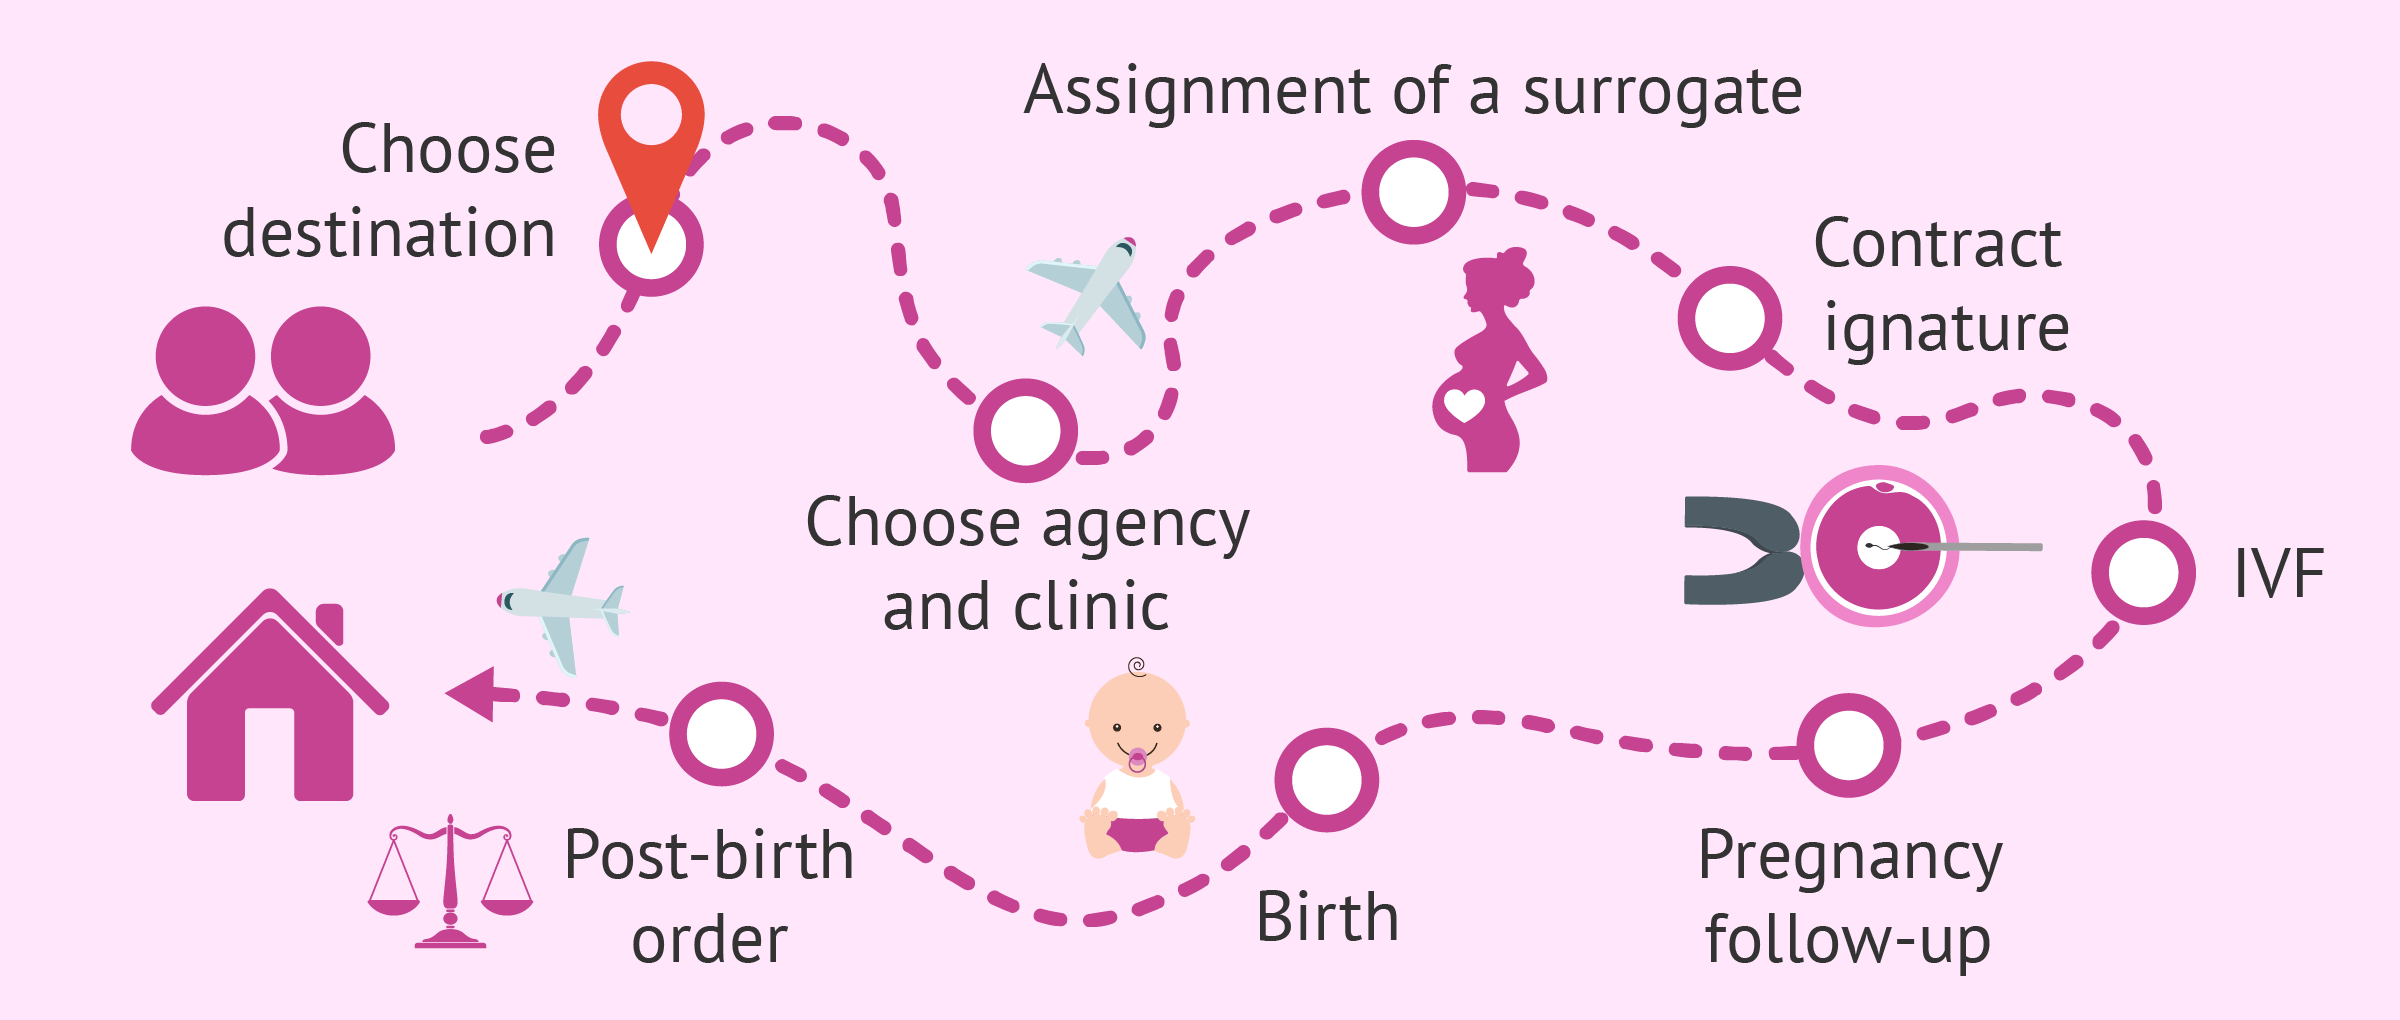 Become parents by surrogacy, what are the different steps?